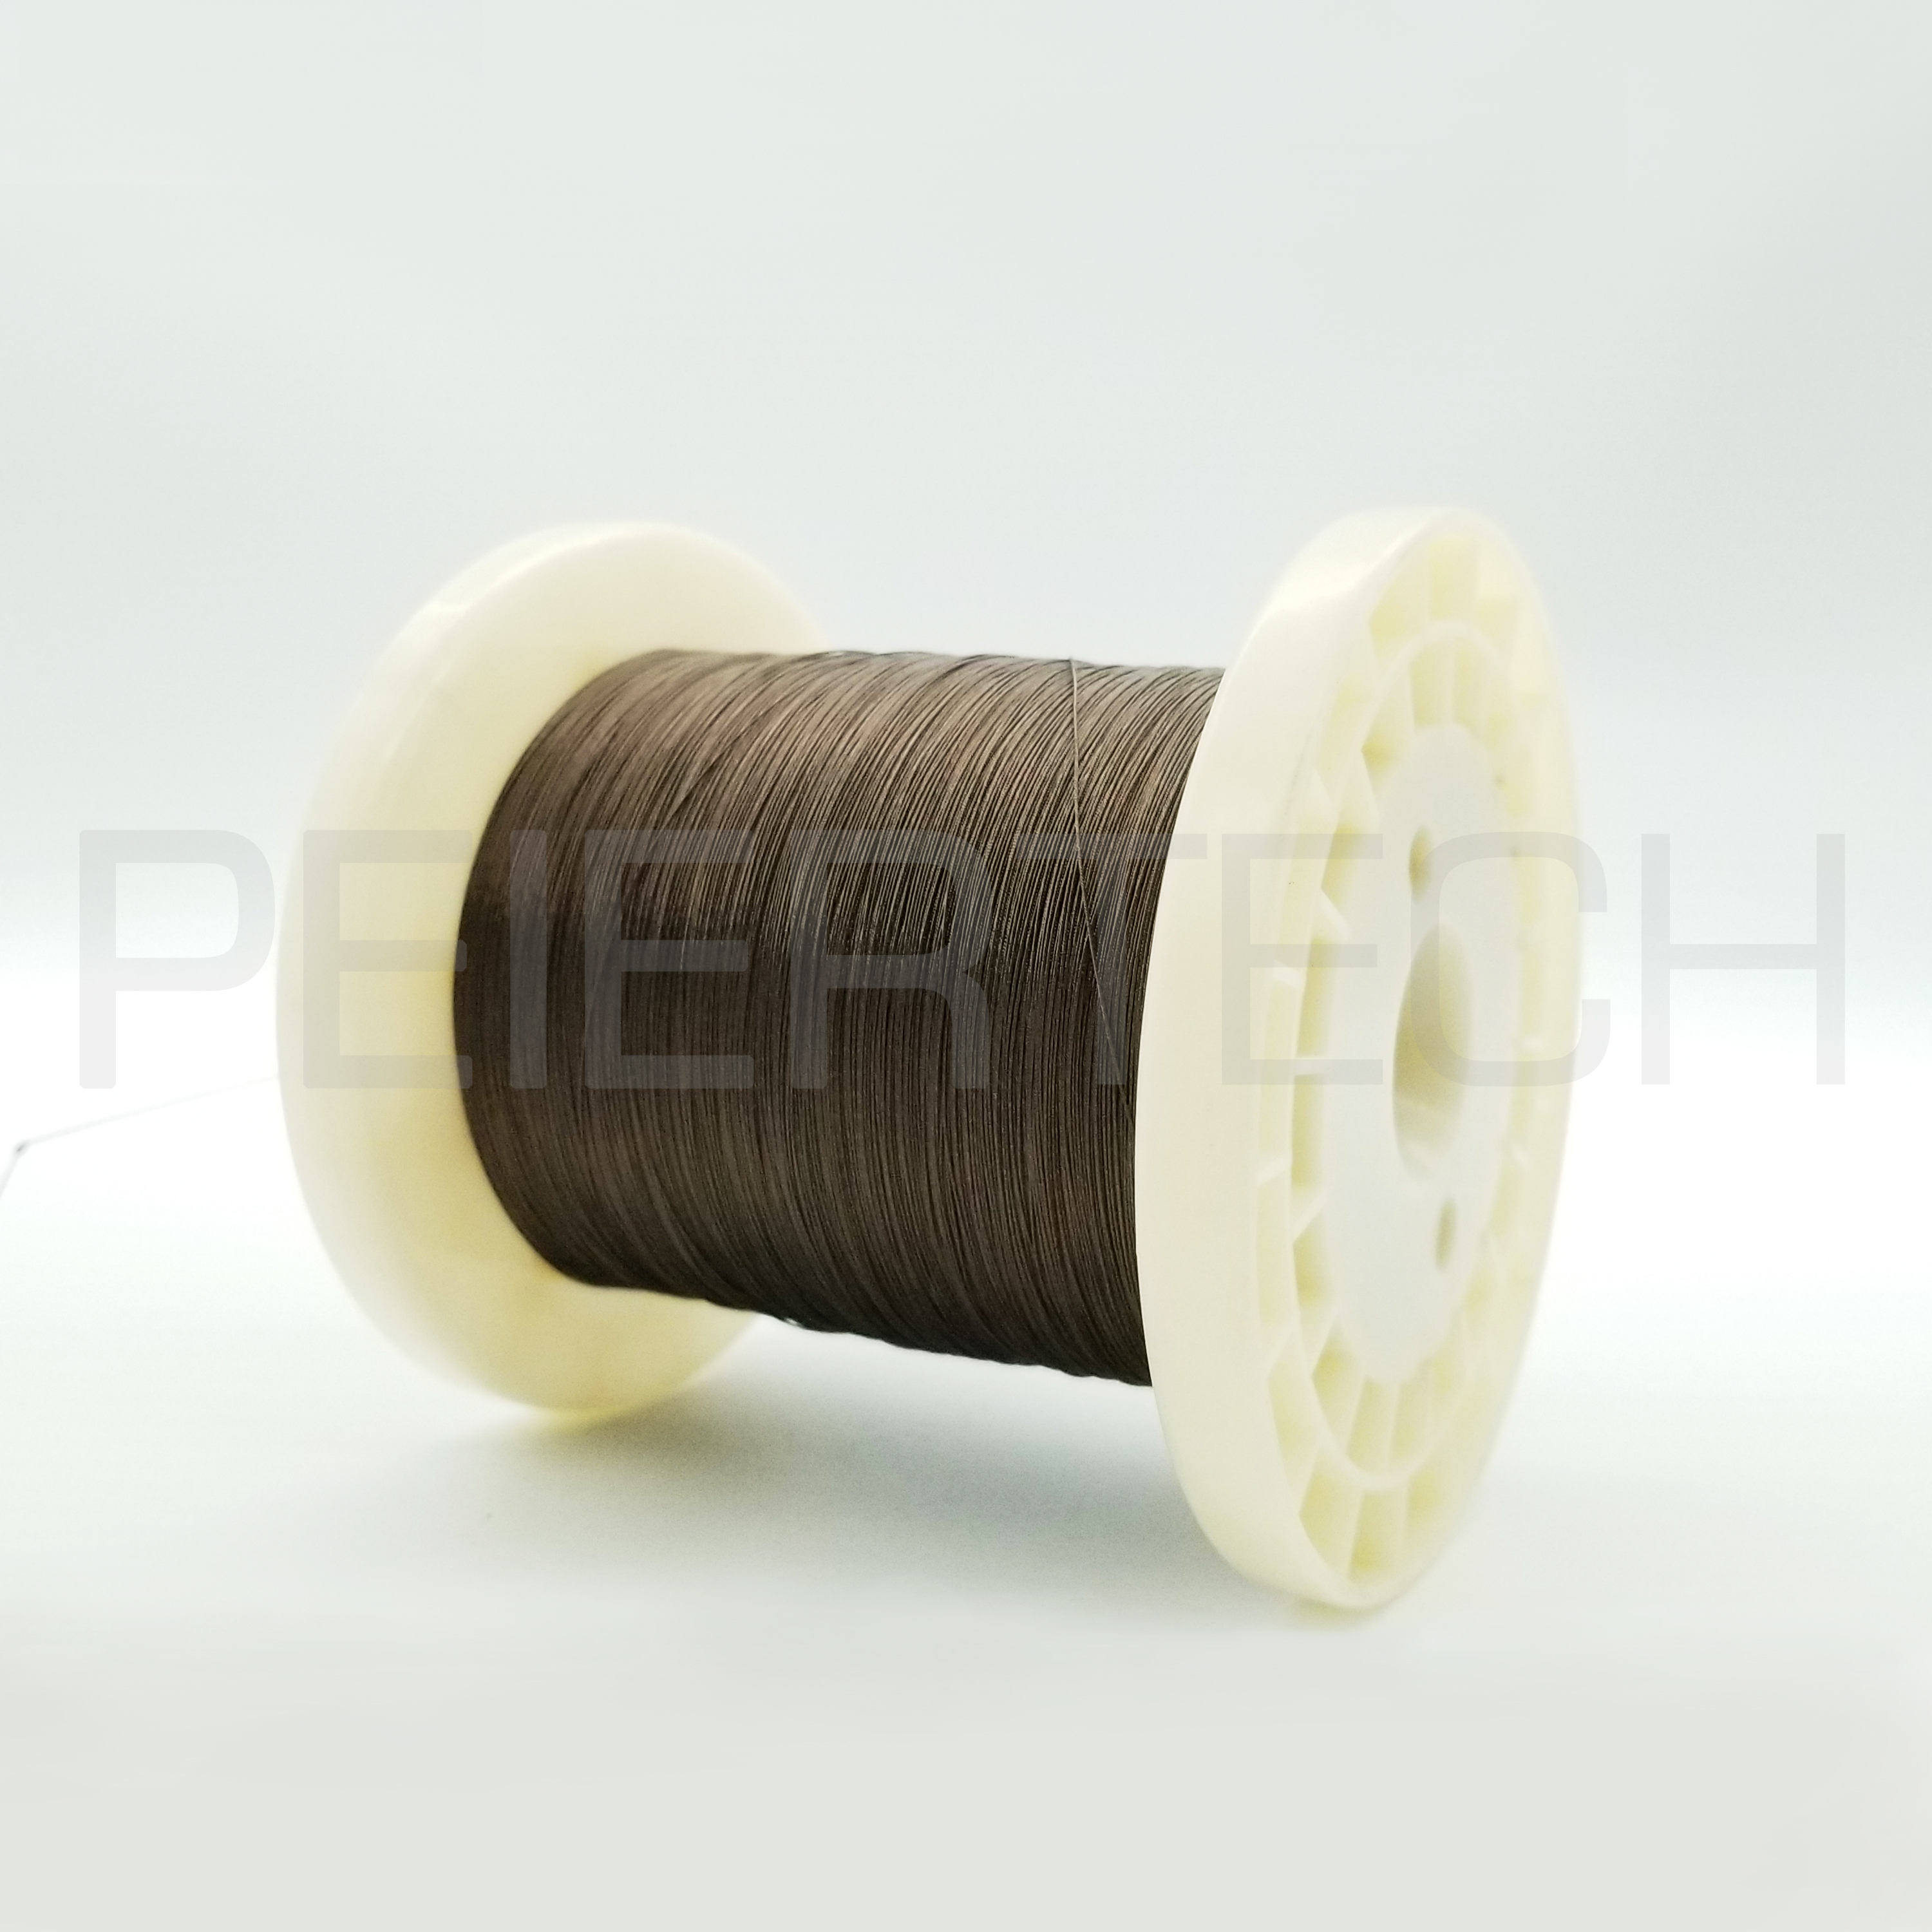 Super-elastic NiTi Rope for Orthopedic Cable System